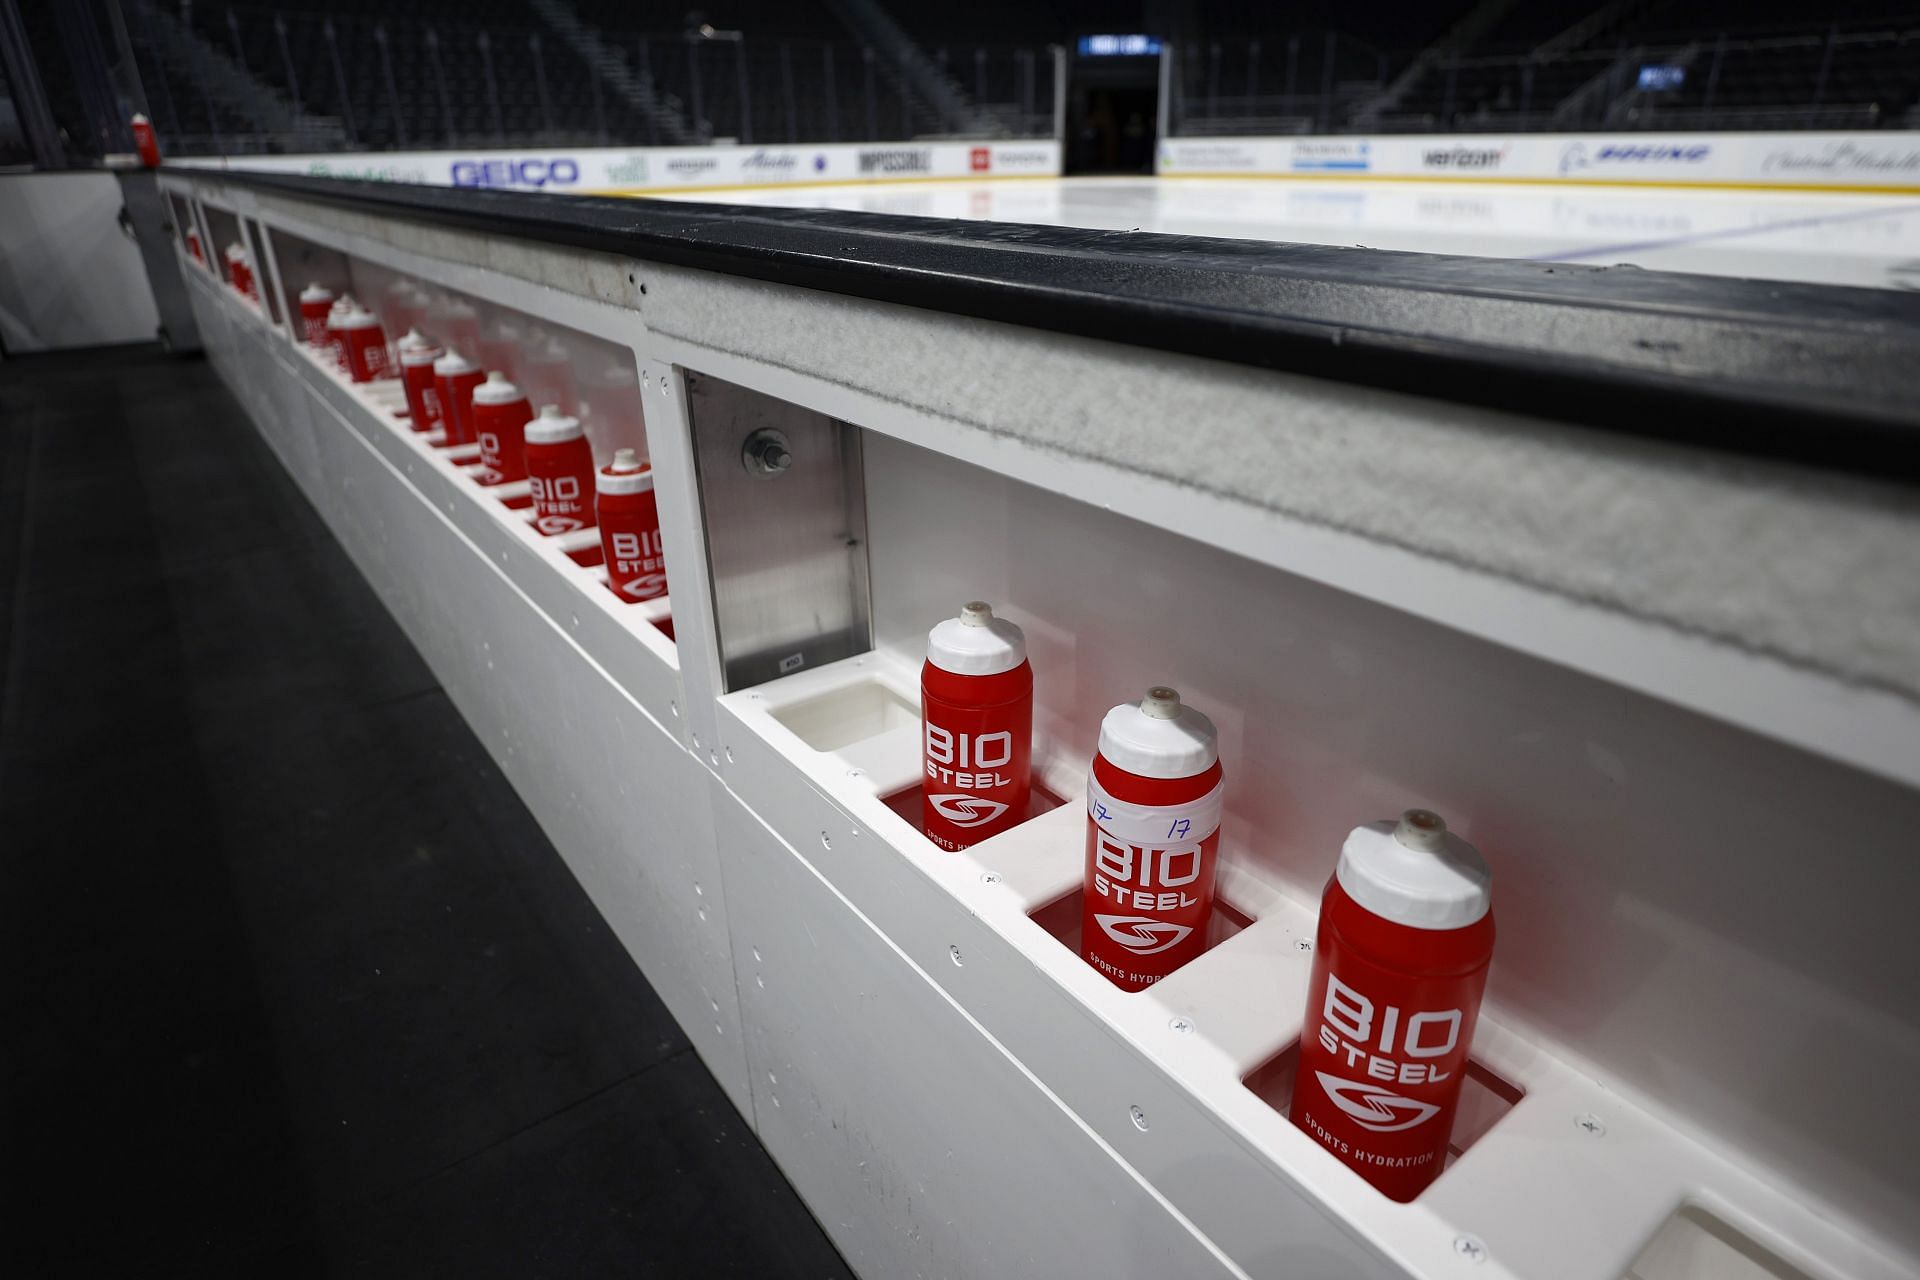 BioSteel is currently on every NHL bench.